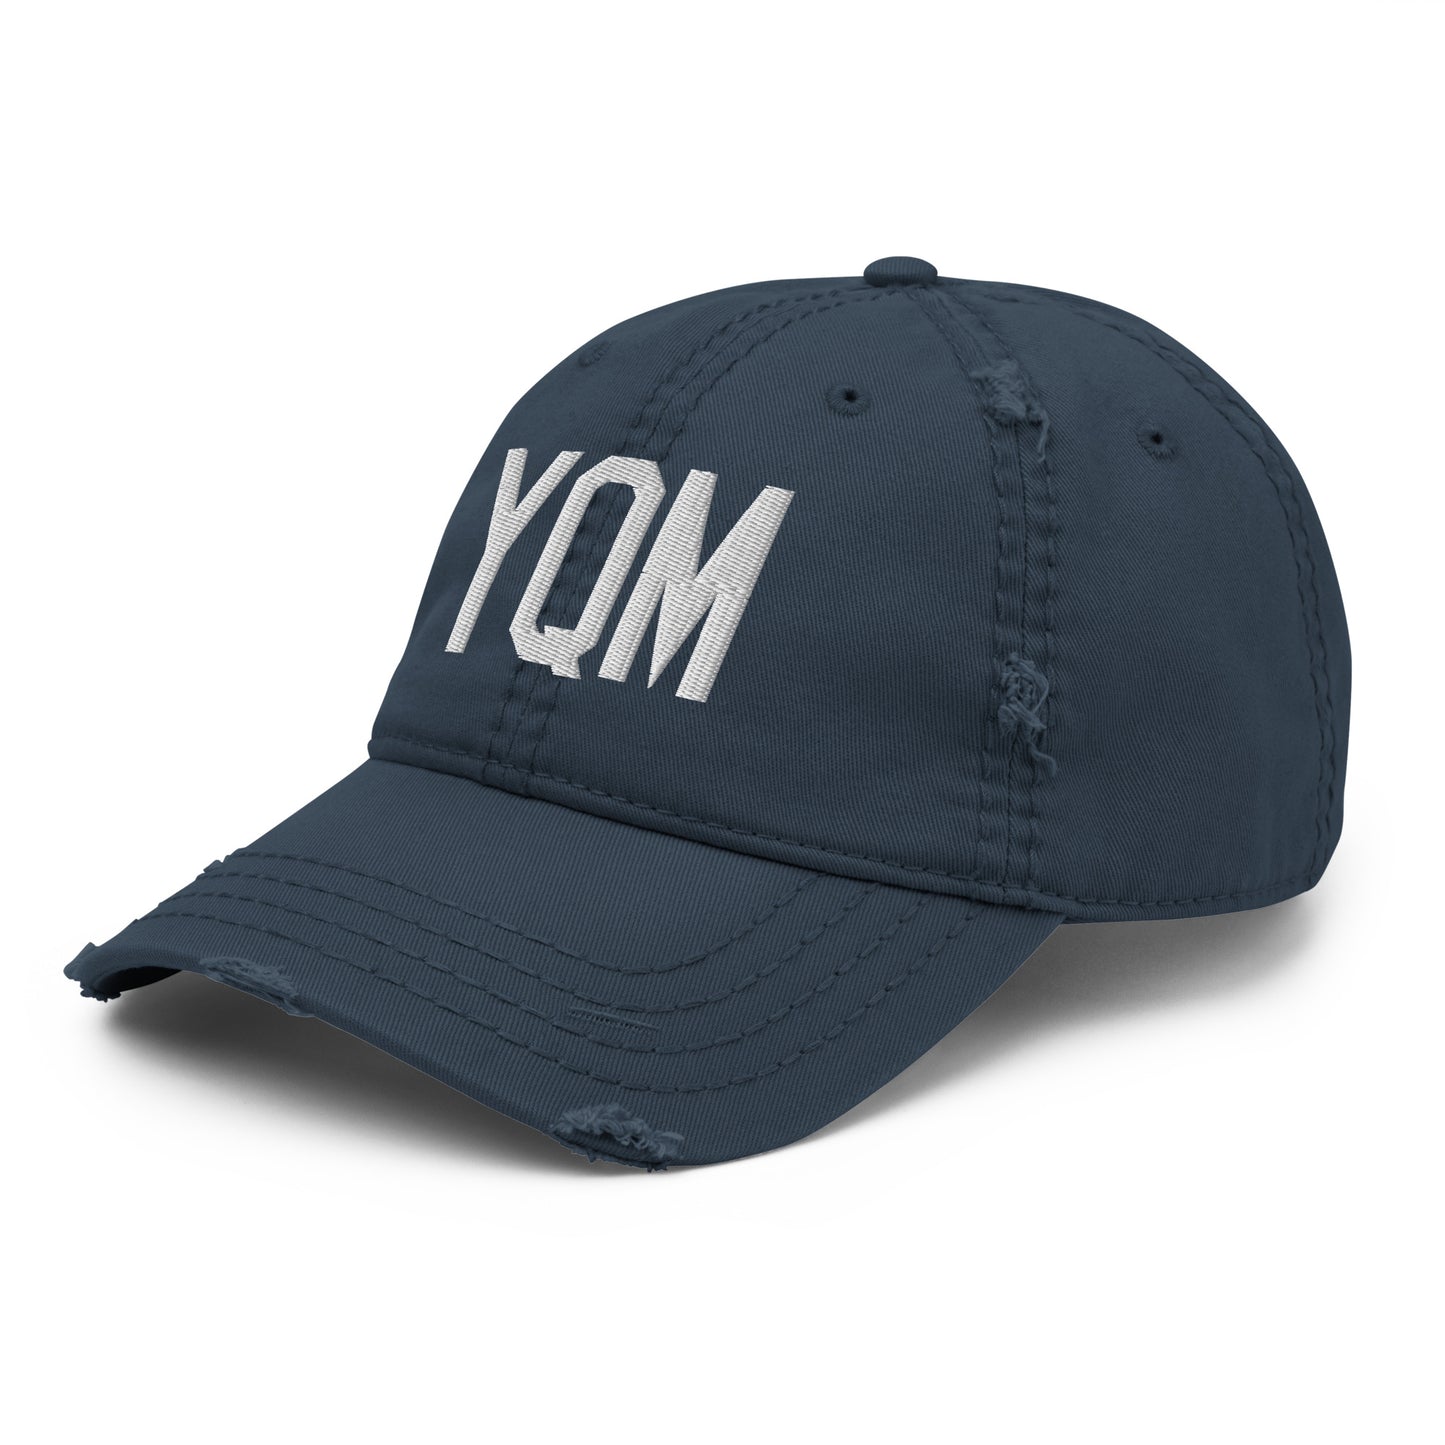 Airport Code Distressed Hat - White • YQM Moncton • YHM Designs - Image 01